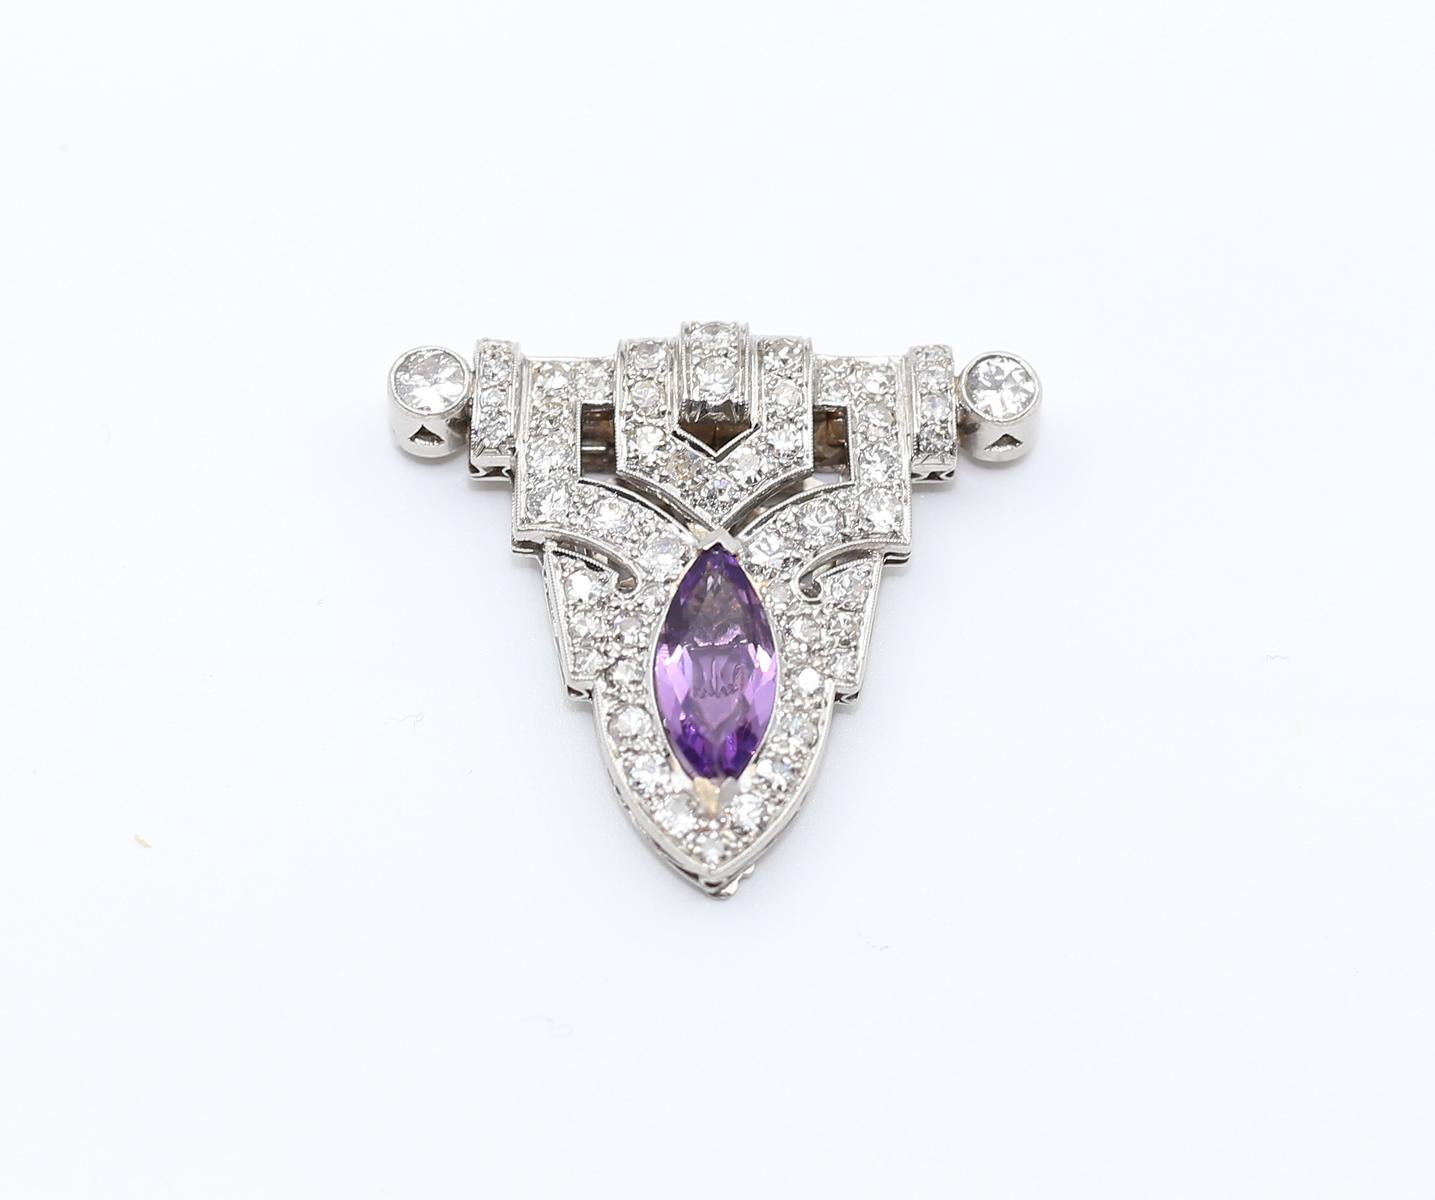 Art Deco Platinum Clip Brooch Amethyst 3 Ct Diamonds Unisex, 1920

This is a stunning Art Deco clip in Platinum, set with Diamonds of various sizes, totaling an approximate weight of 3 Carats. The clip features typical geometric designs of the Art